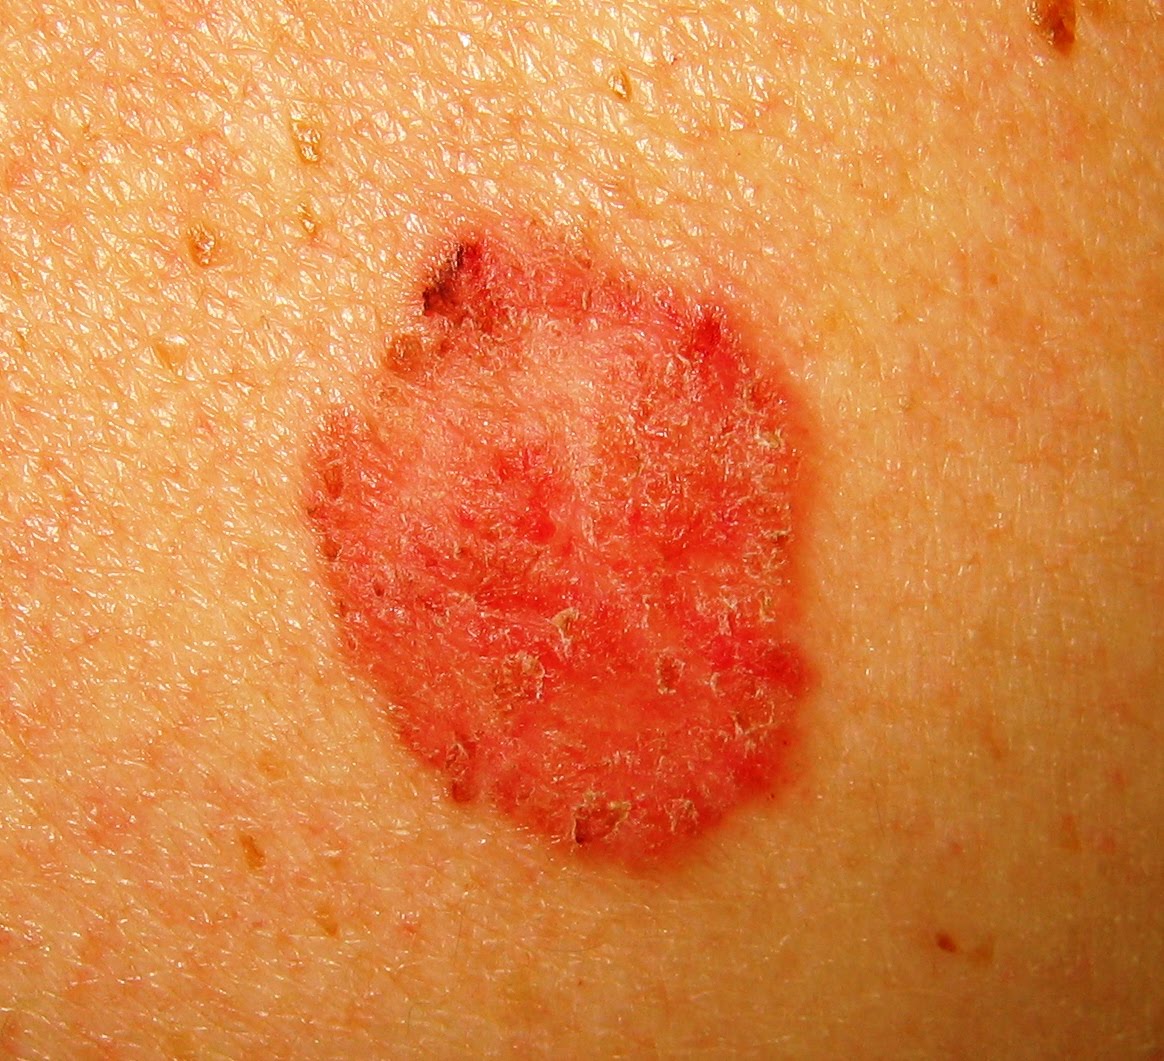 Red Raised Blood Spots On Skin